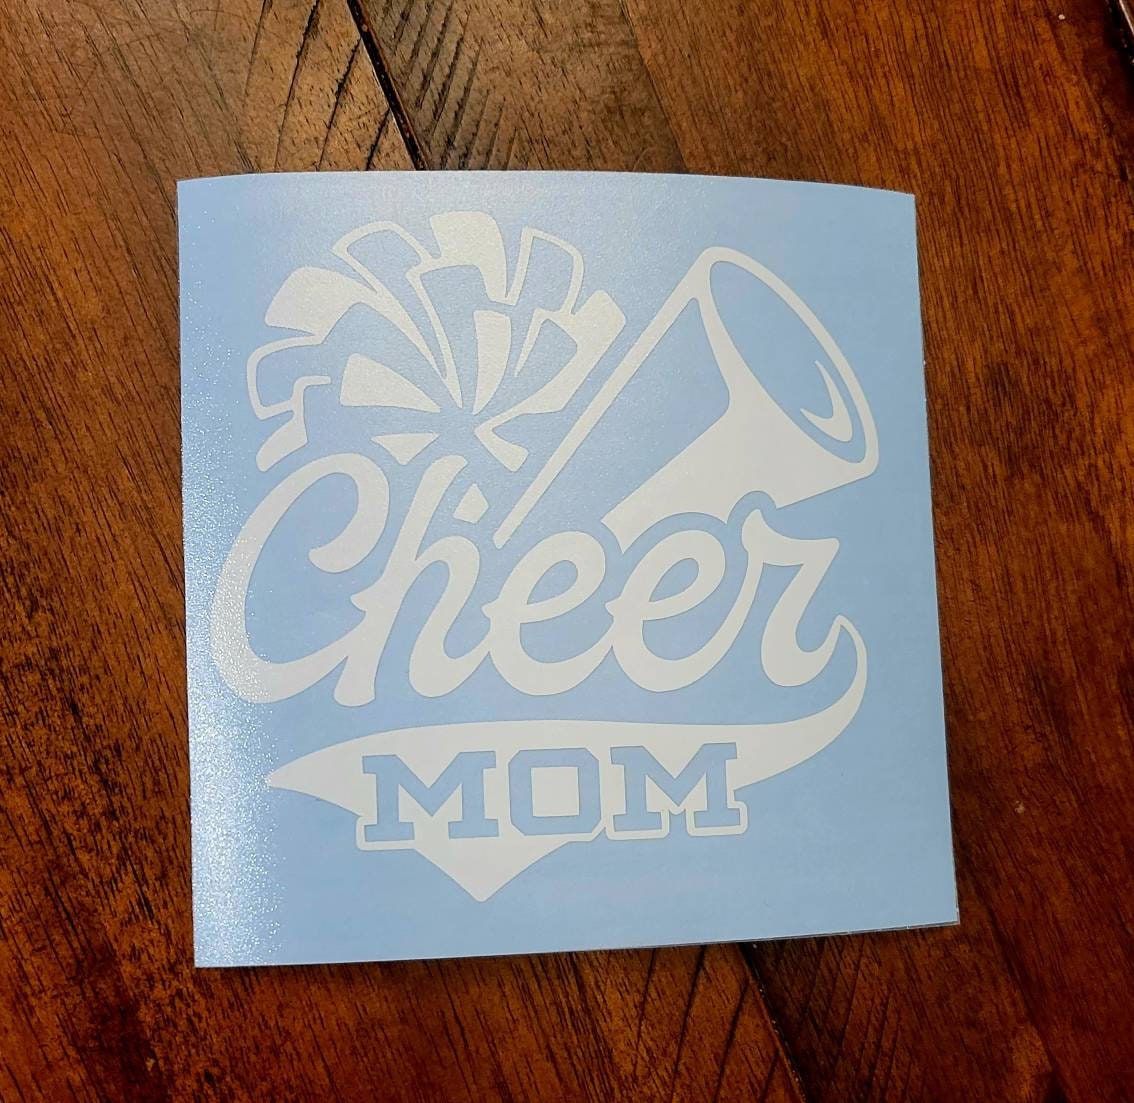 1 Bow Decal, Cute Bow Sticker, Hairbow Decal, Hairbow, Cheerleading Stickers,  Hair Bow, Sticker, Decals, Cheerleader Decal, Stickers 